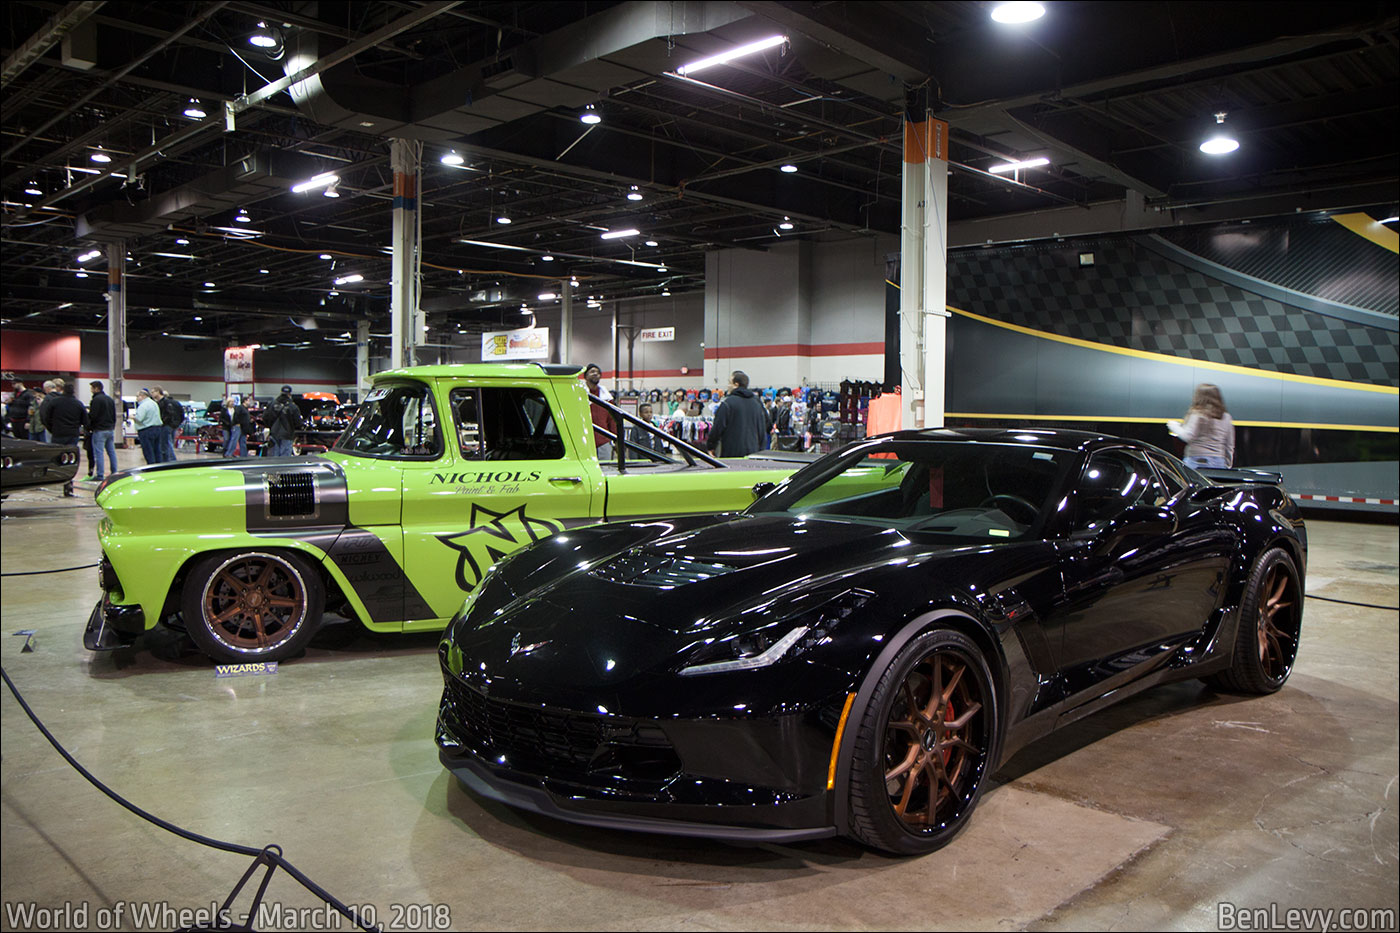 Old and new at World of Wheels